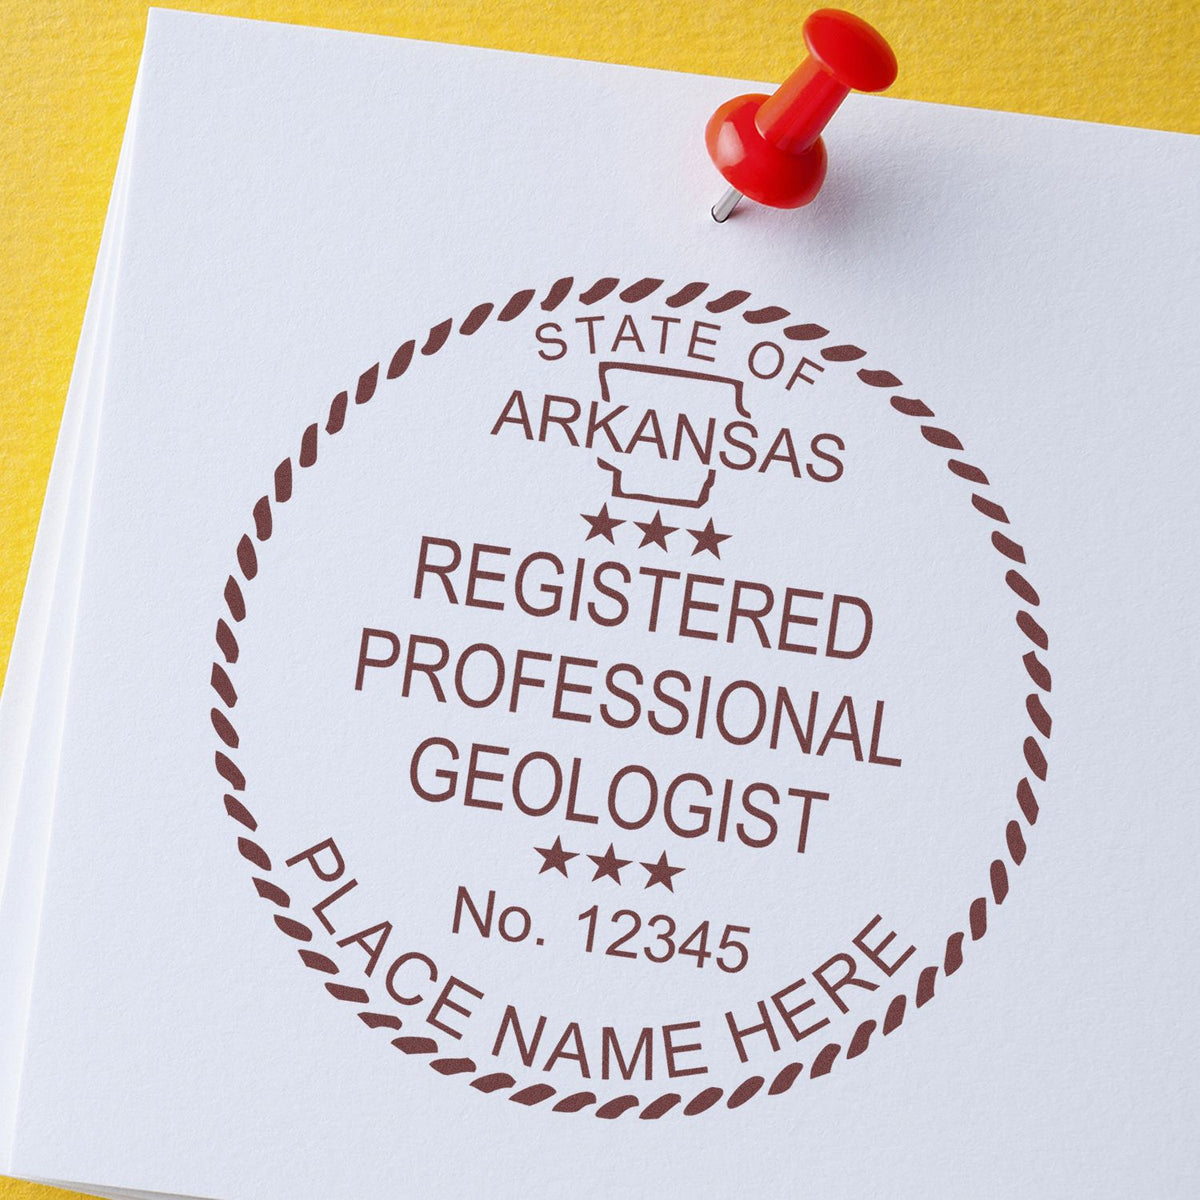 Another Example of a stamped impression of the Slim Pre-Inked Arkansas Professional Geologist Seal Stamp on a office form